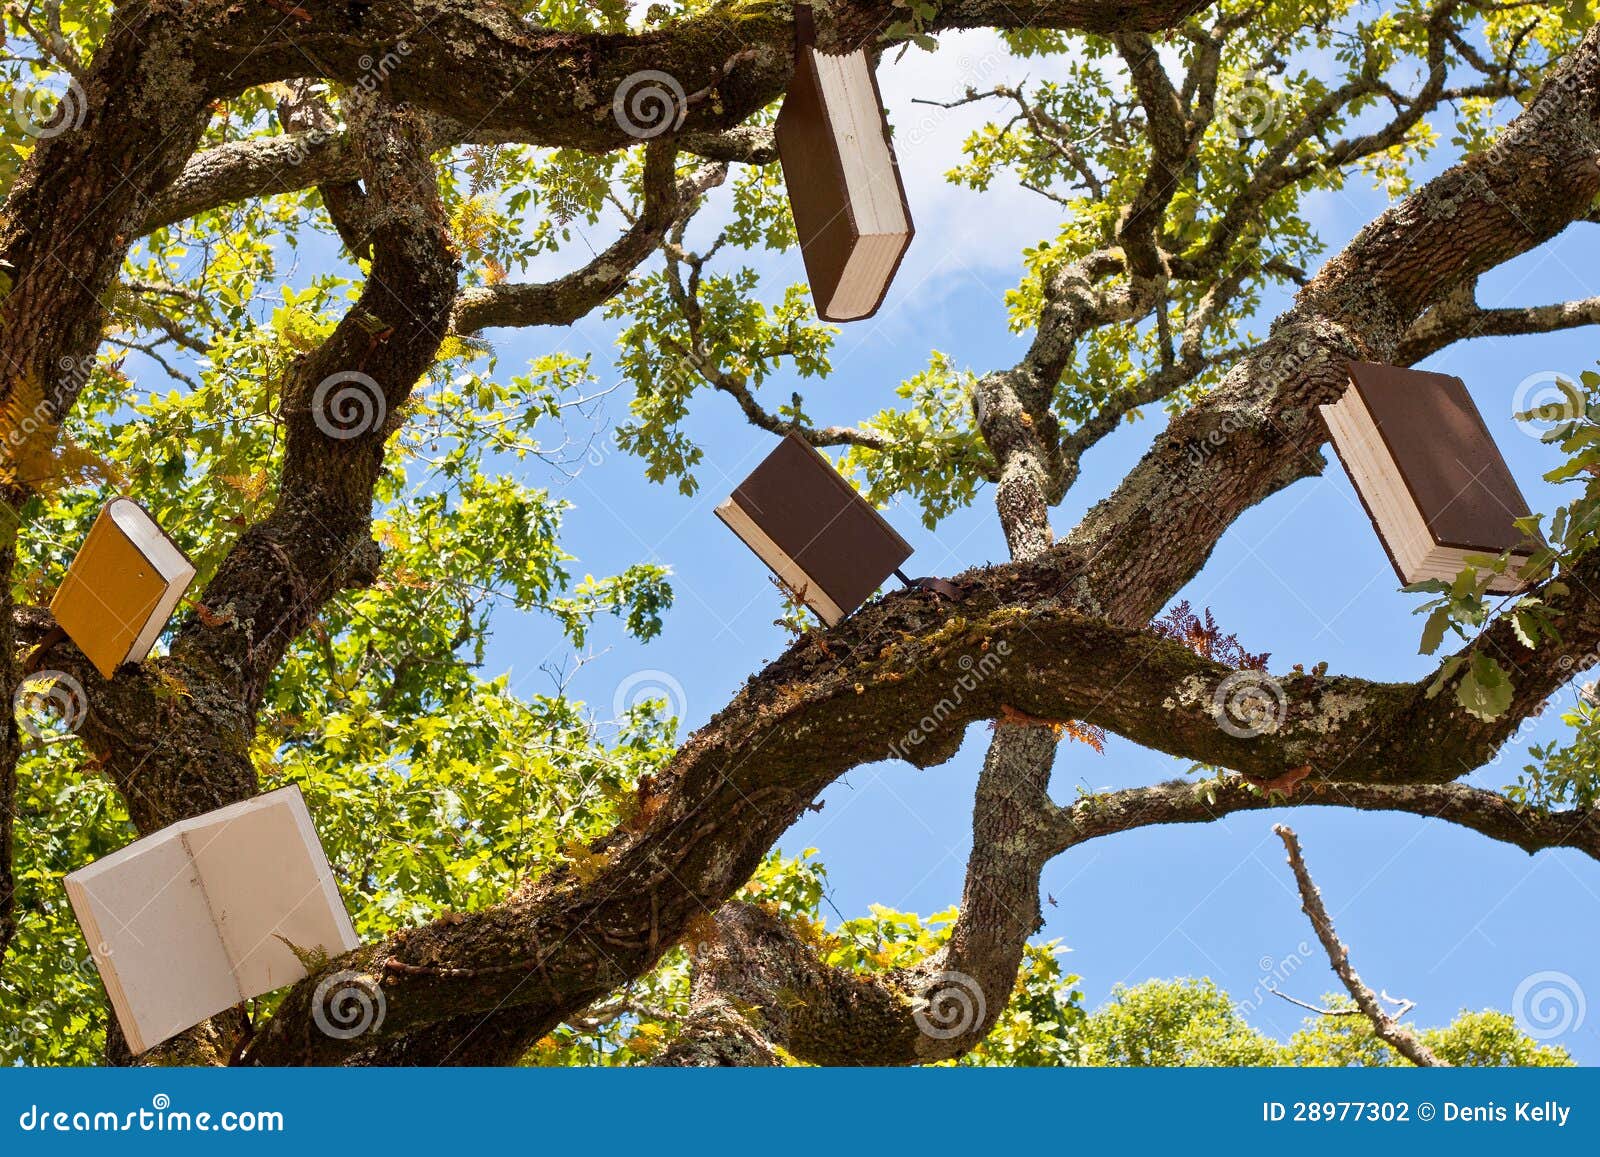 tree of books learning and knowledge